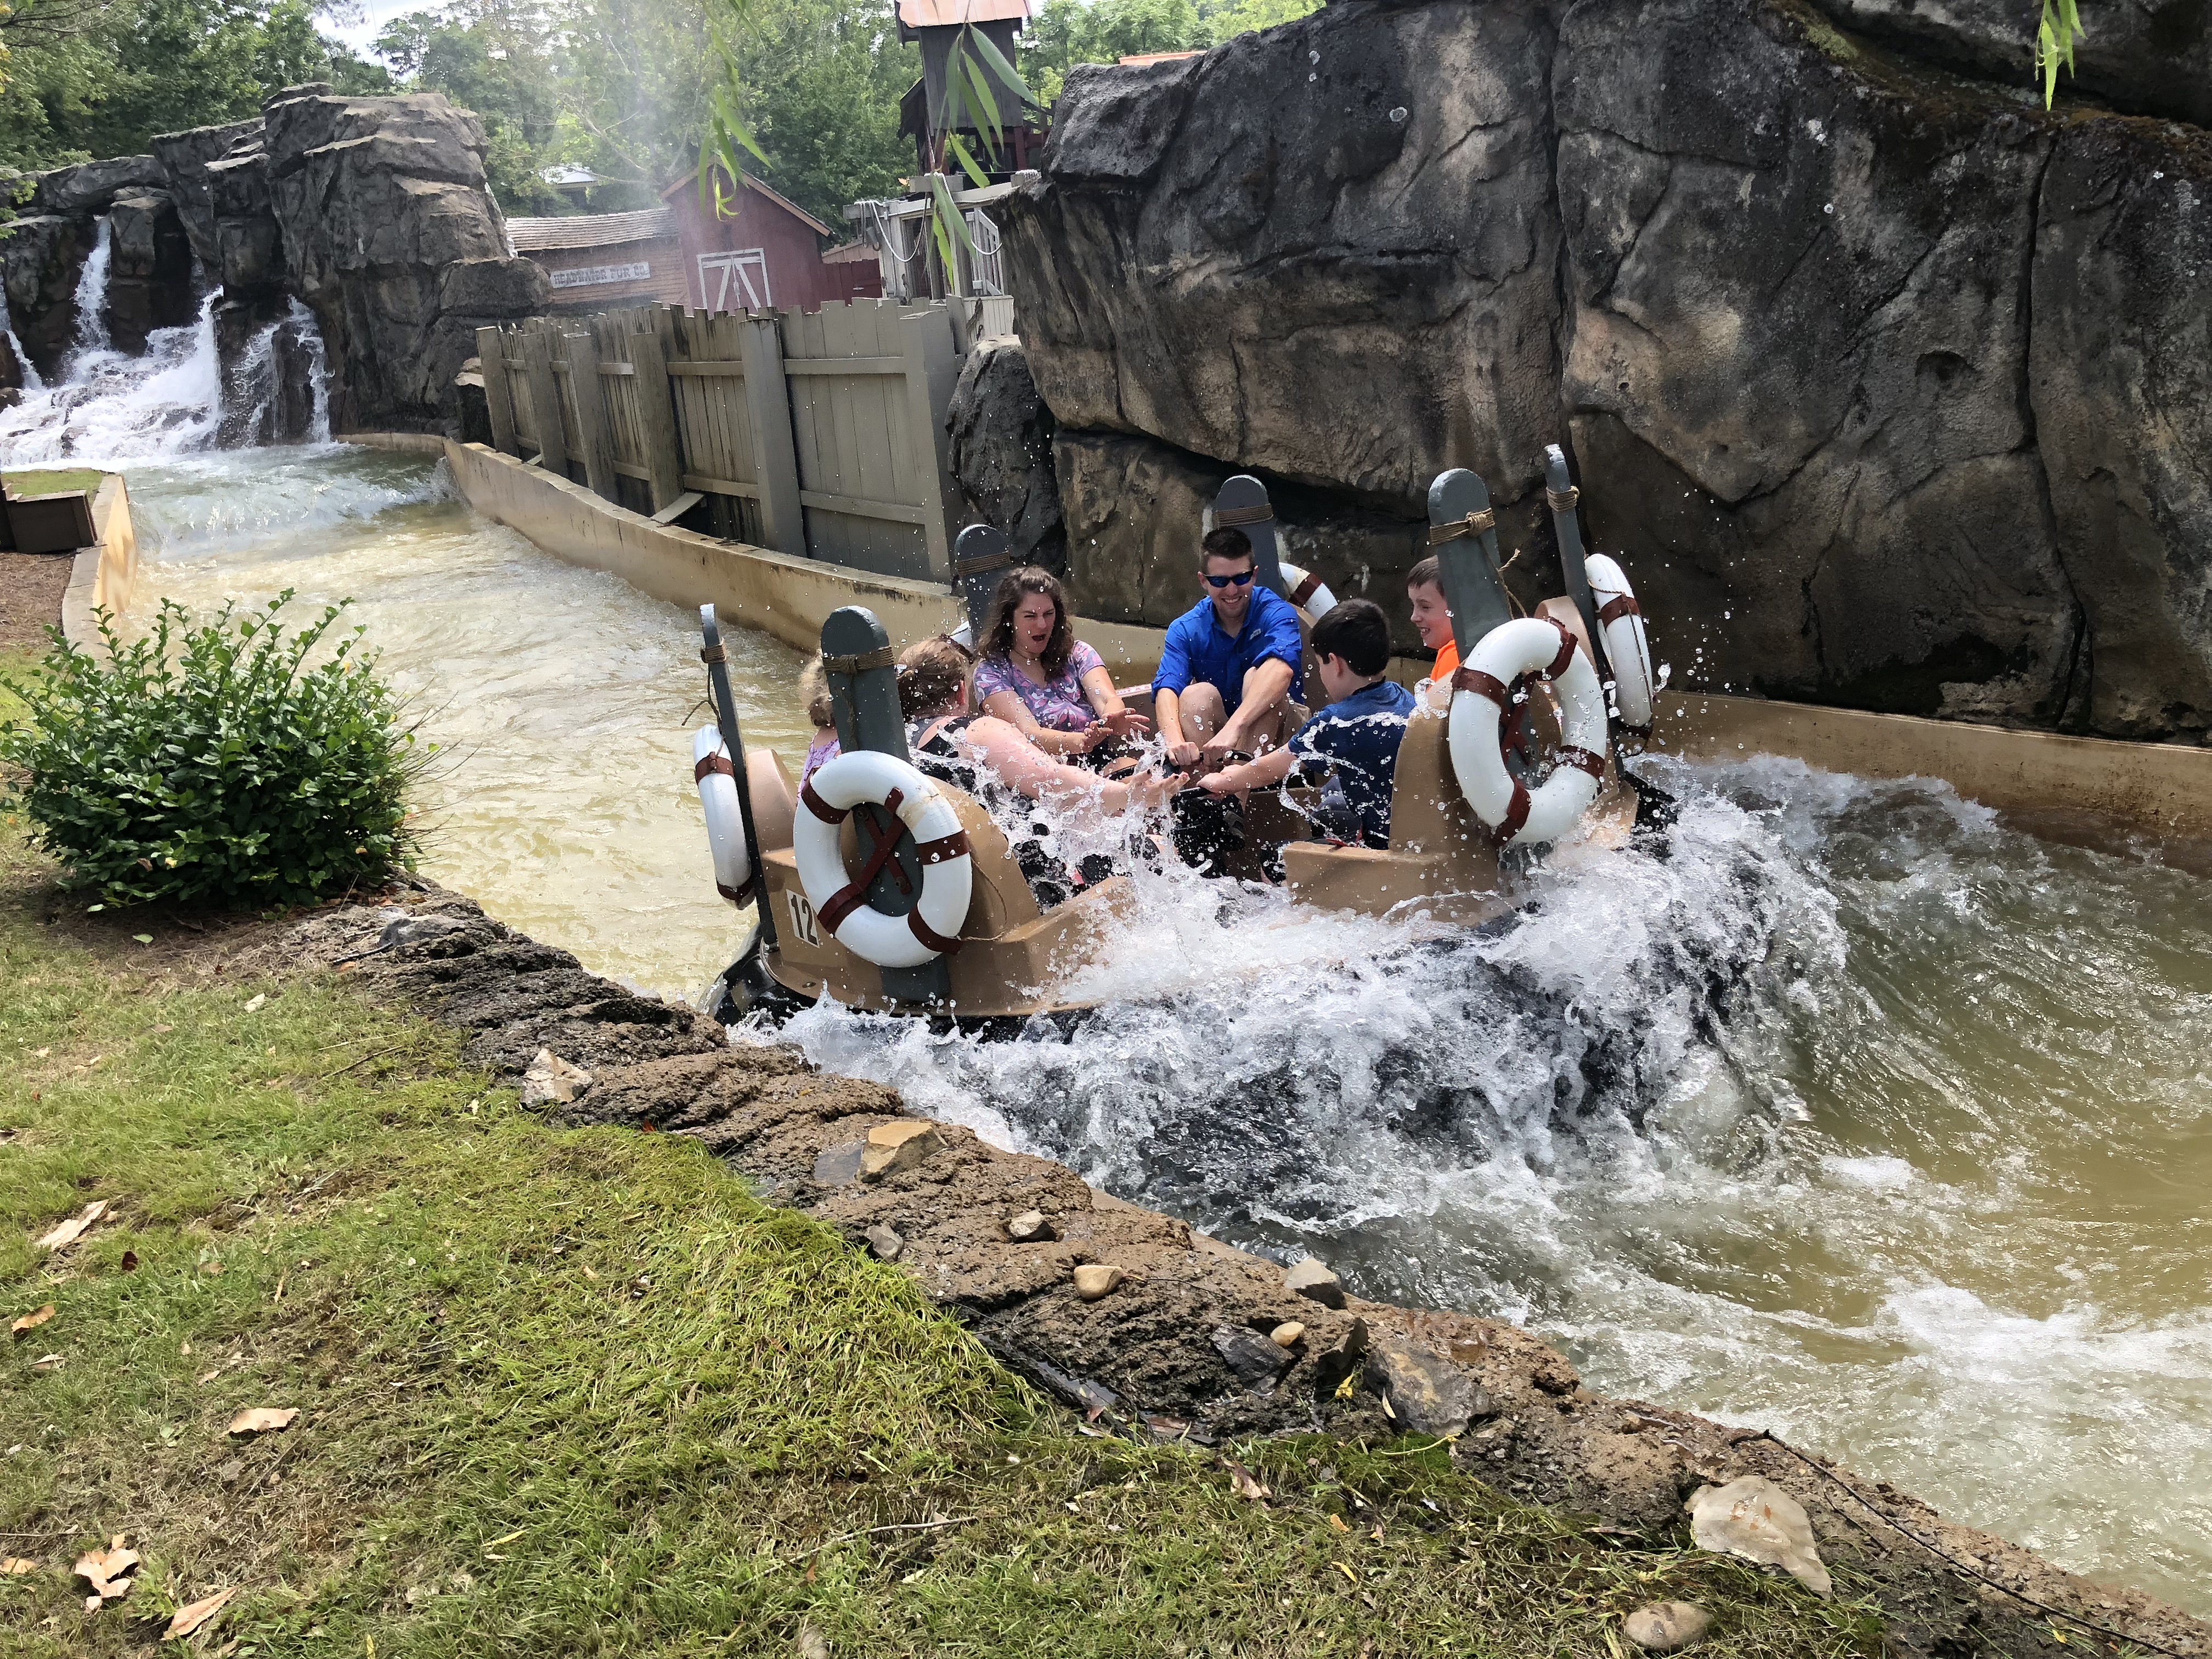 Rapids Cart getting drenched in ride river